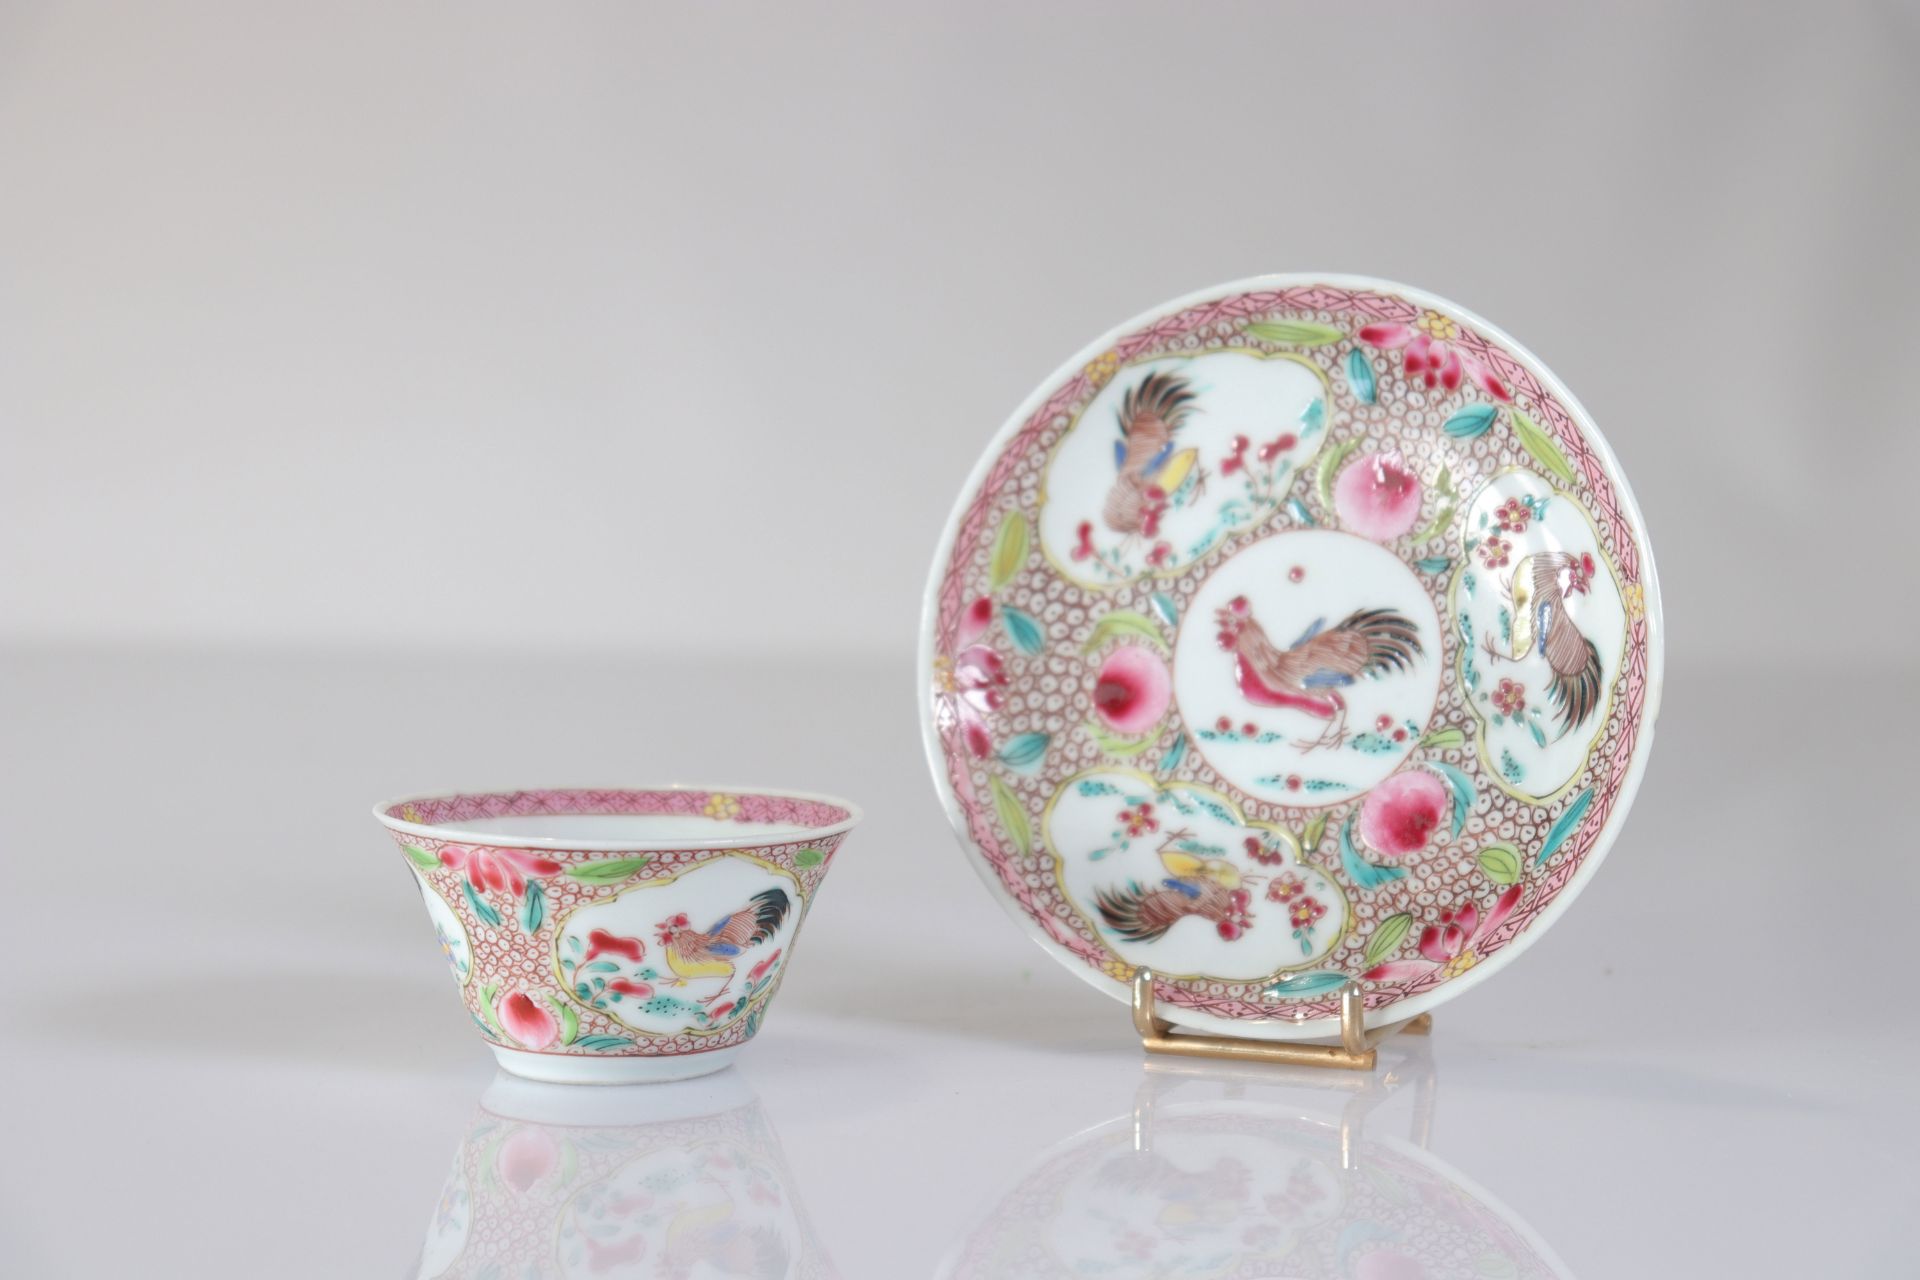 Bowl and saucer in 18th century Chinese porcelain decorated with roosters